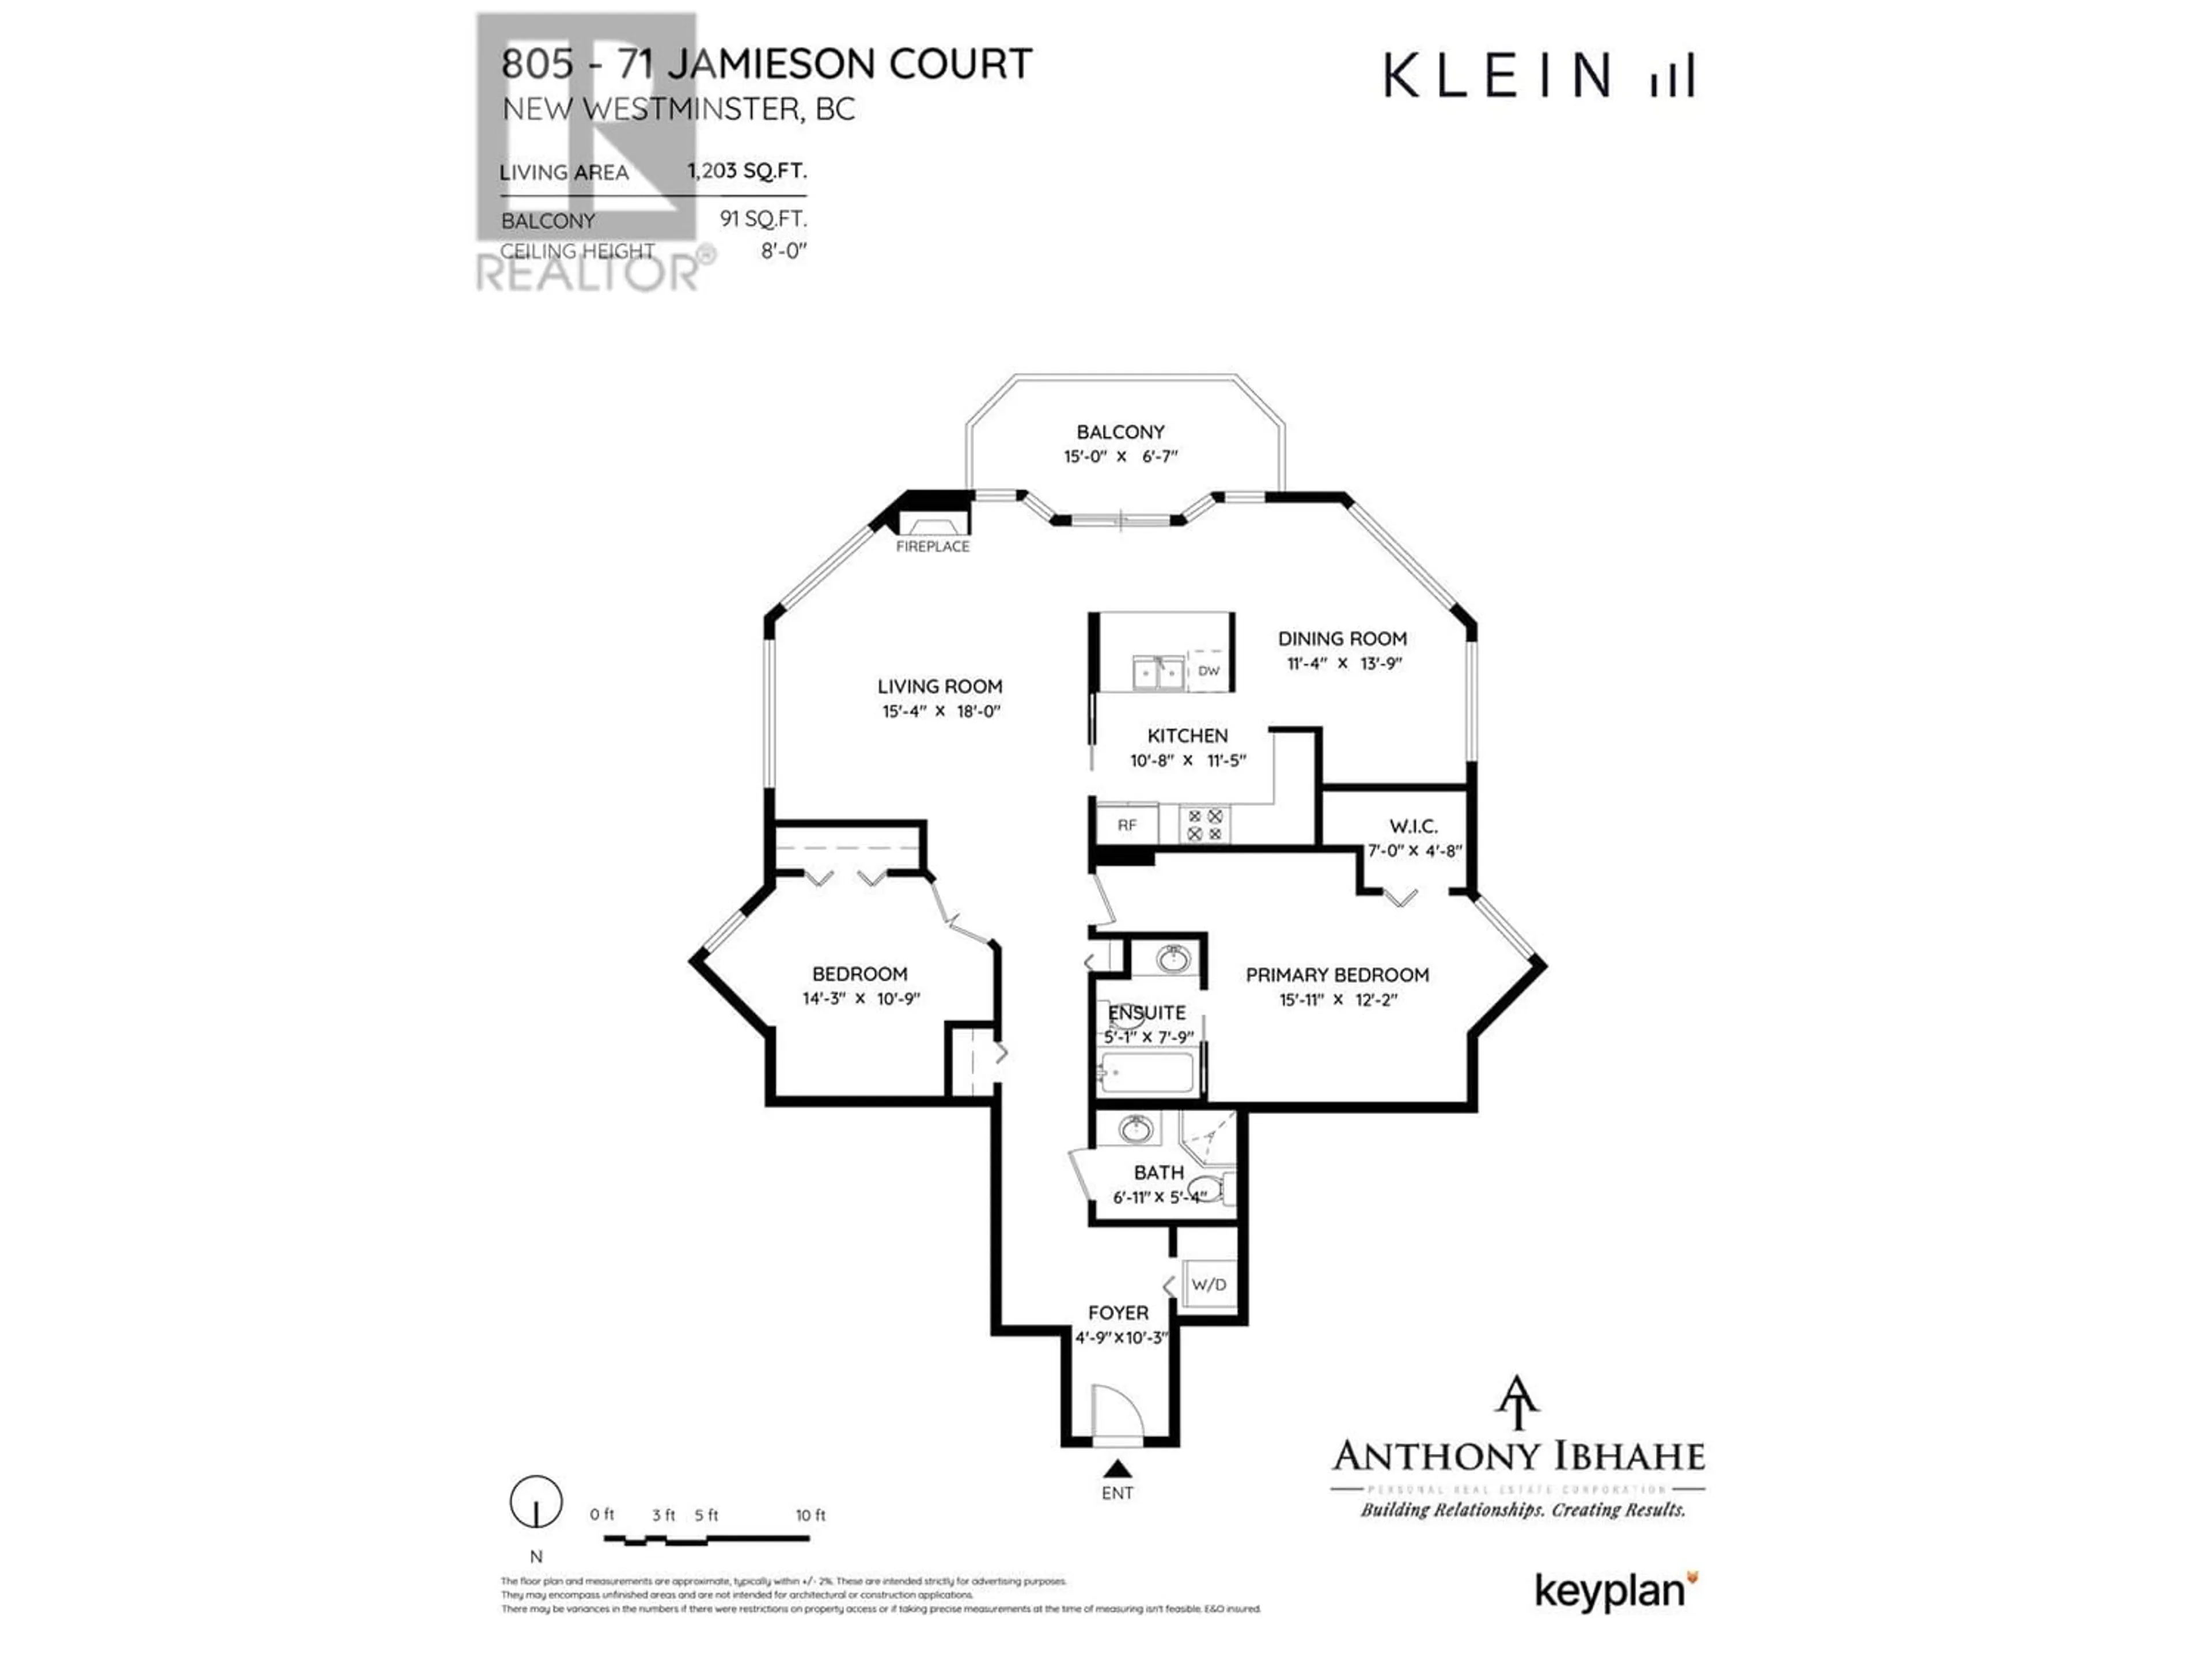 Floor plan for 805 71 JAMIESON COURT, New Westminster British Columbia V3L5R4